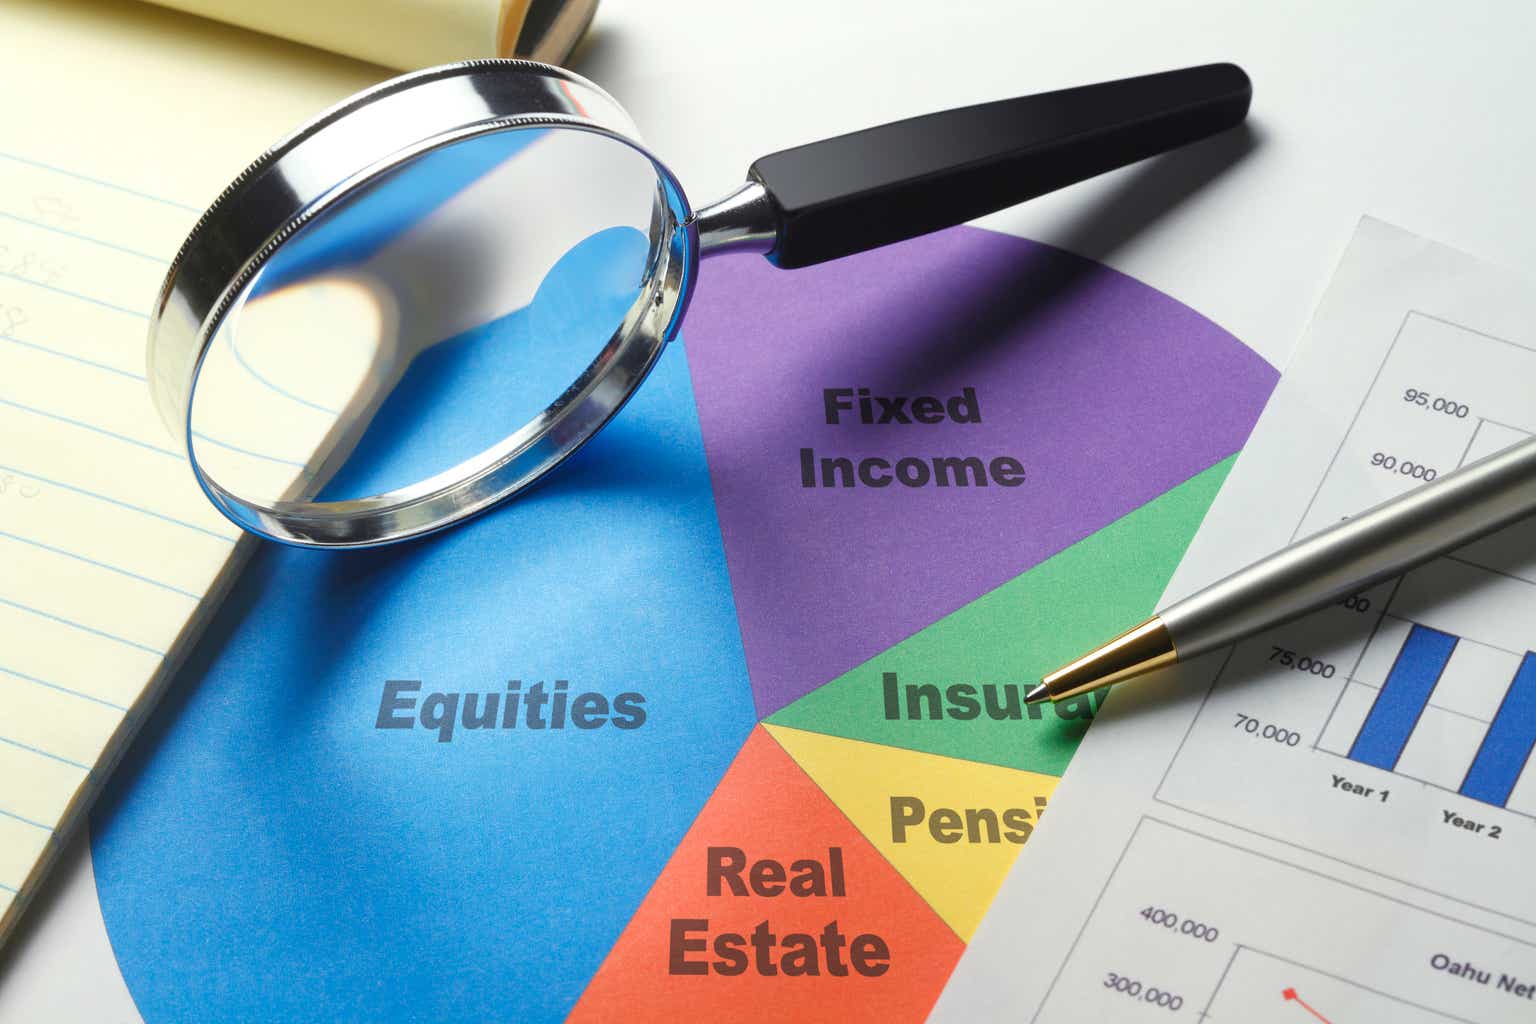 KKR Income Opportunities Fund: An Opportunity To Add Income To Your Retirement Portfolio